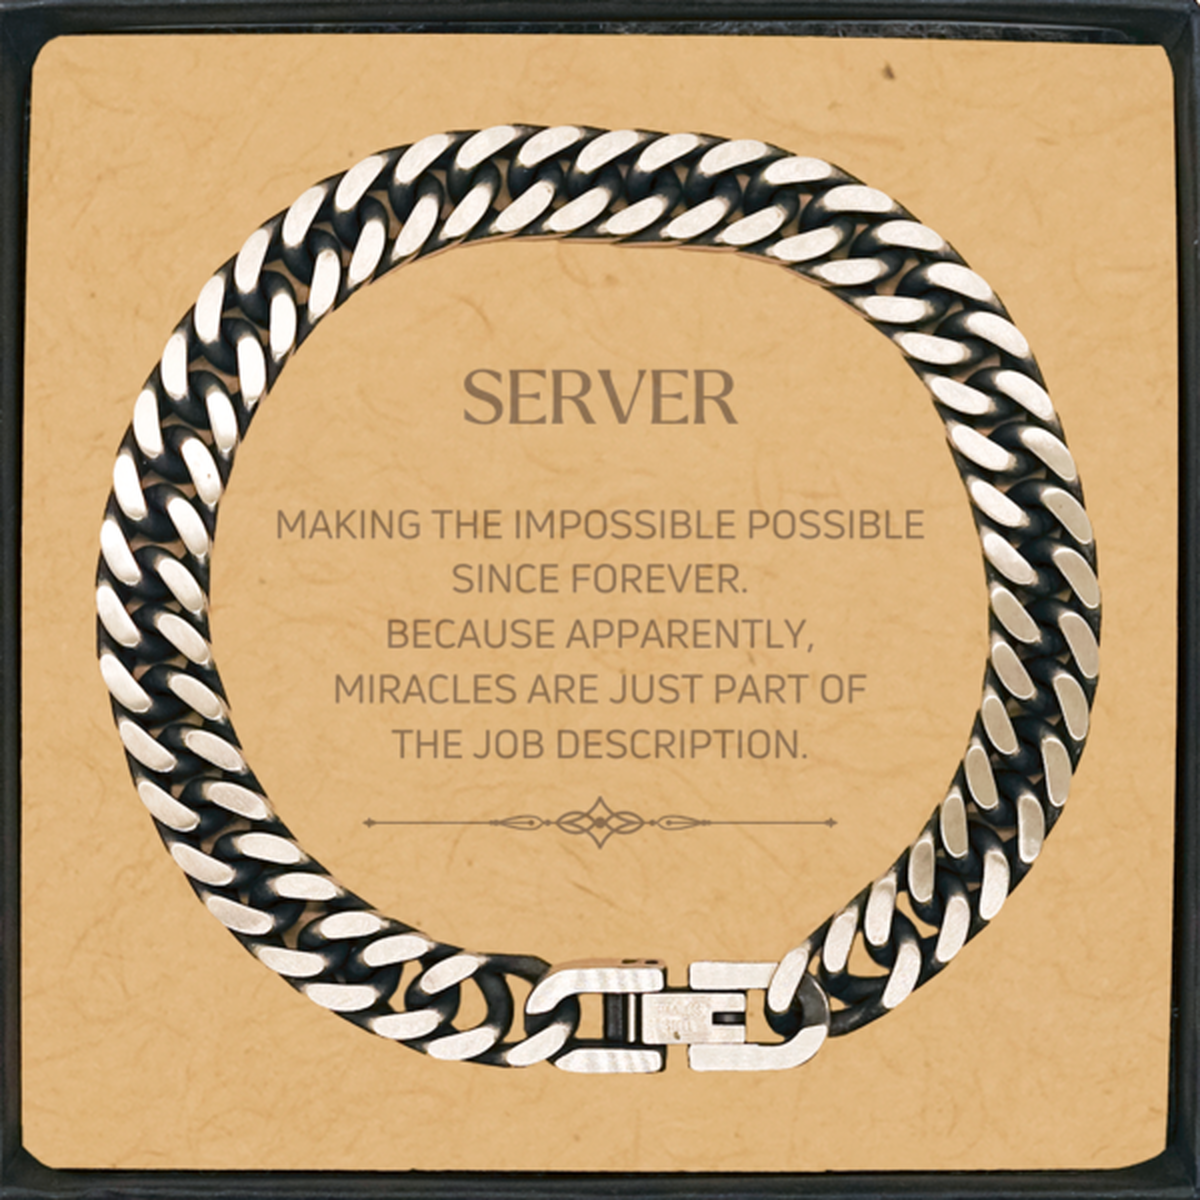 Funny Server Gifts, Miracles are just part of the job description, Inspirational Birthday Cuban Link Chain Bracelet For Server, Men, Women, Coworkers, Friends, Boss